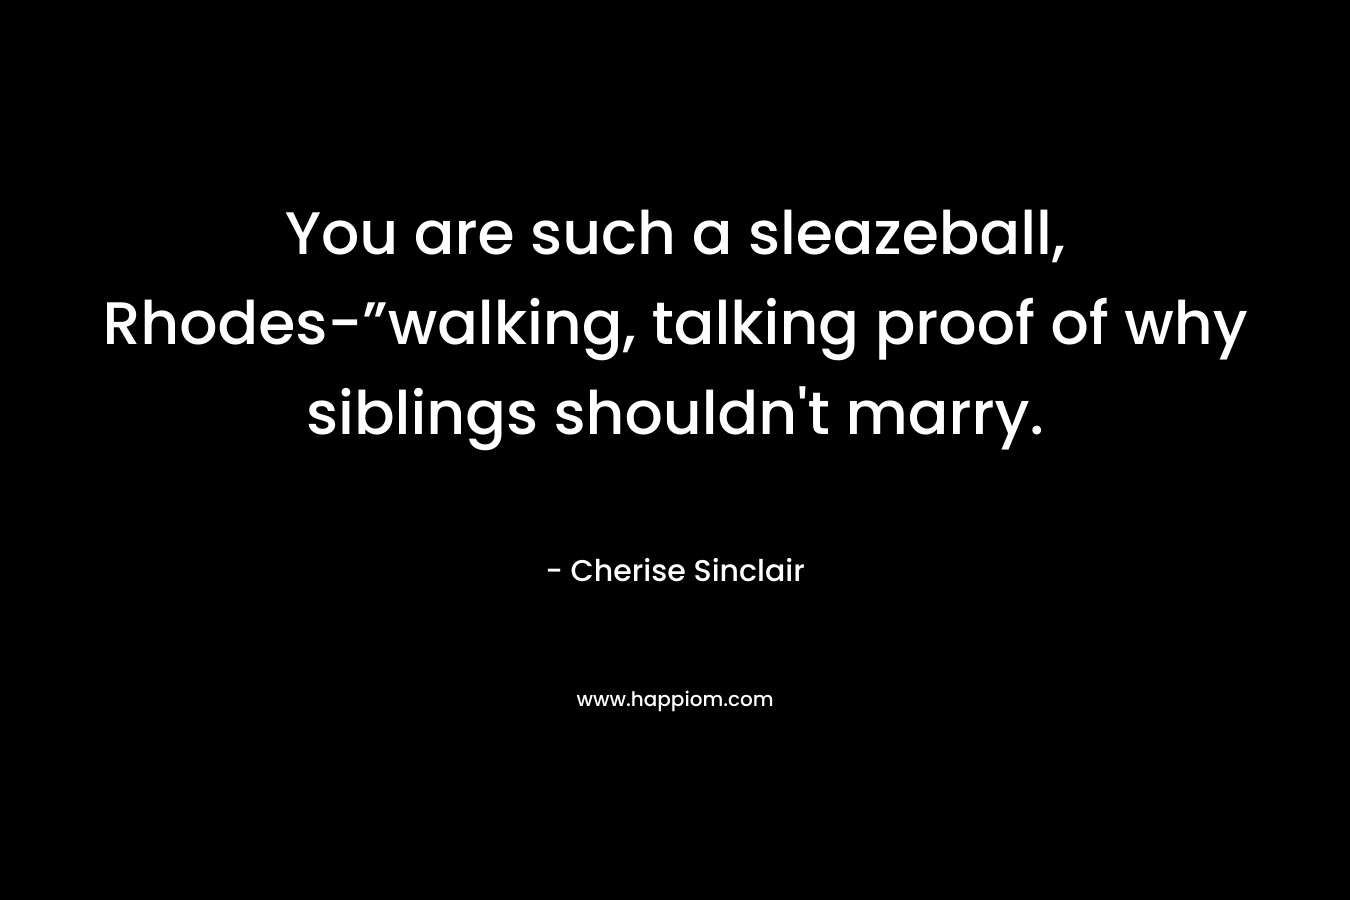 You are such a sleazeball, Rhodes-”walking, talking proof of why siblings shouldn't marry.